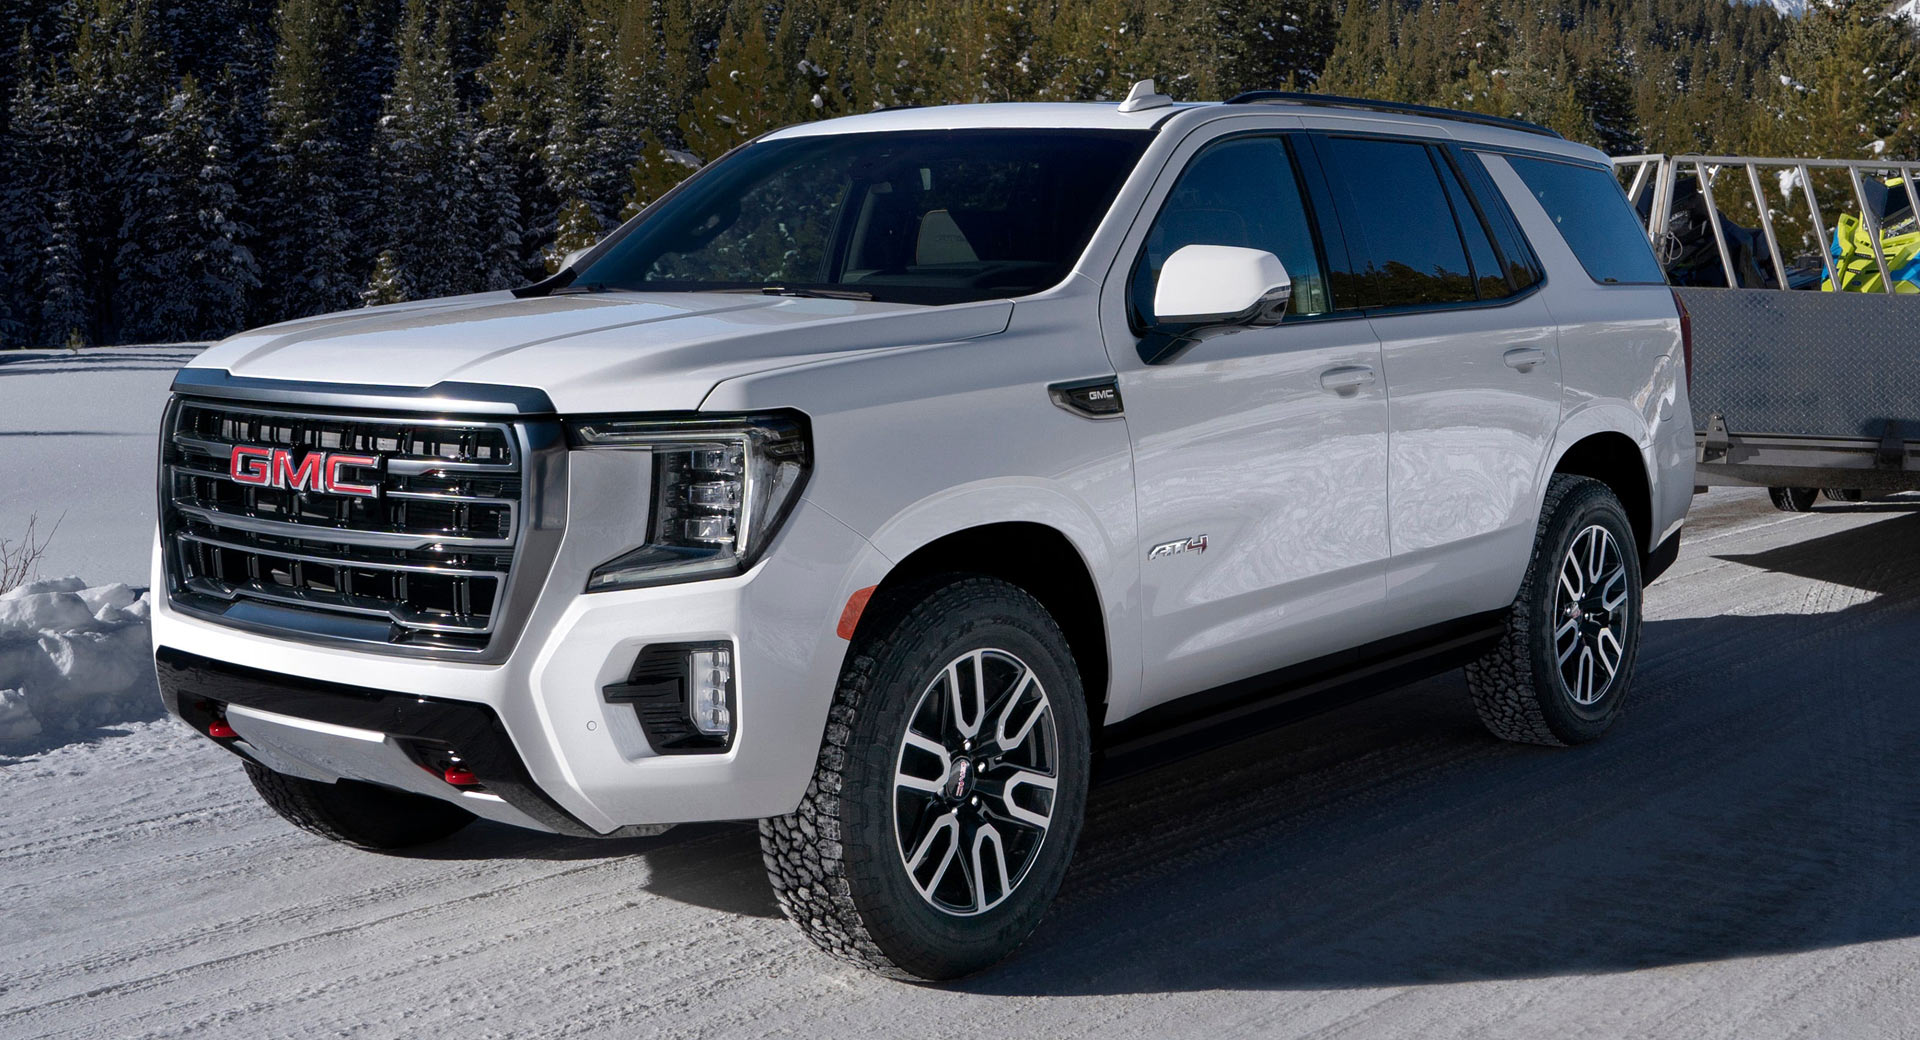 21 Gmc Yukon Is All New From The Ground Up Gains Rugged At4 Variant Carscoops